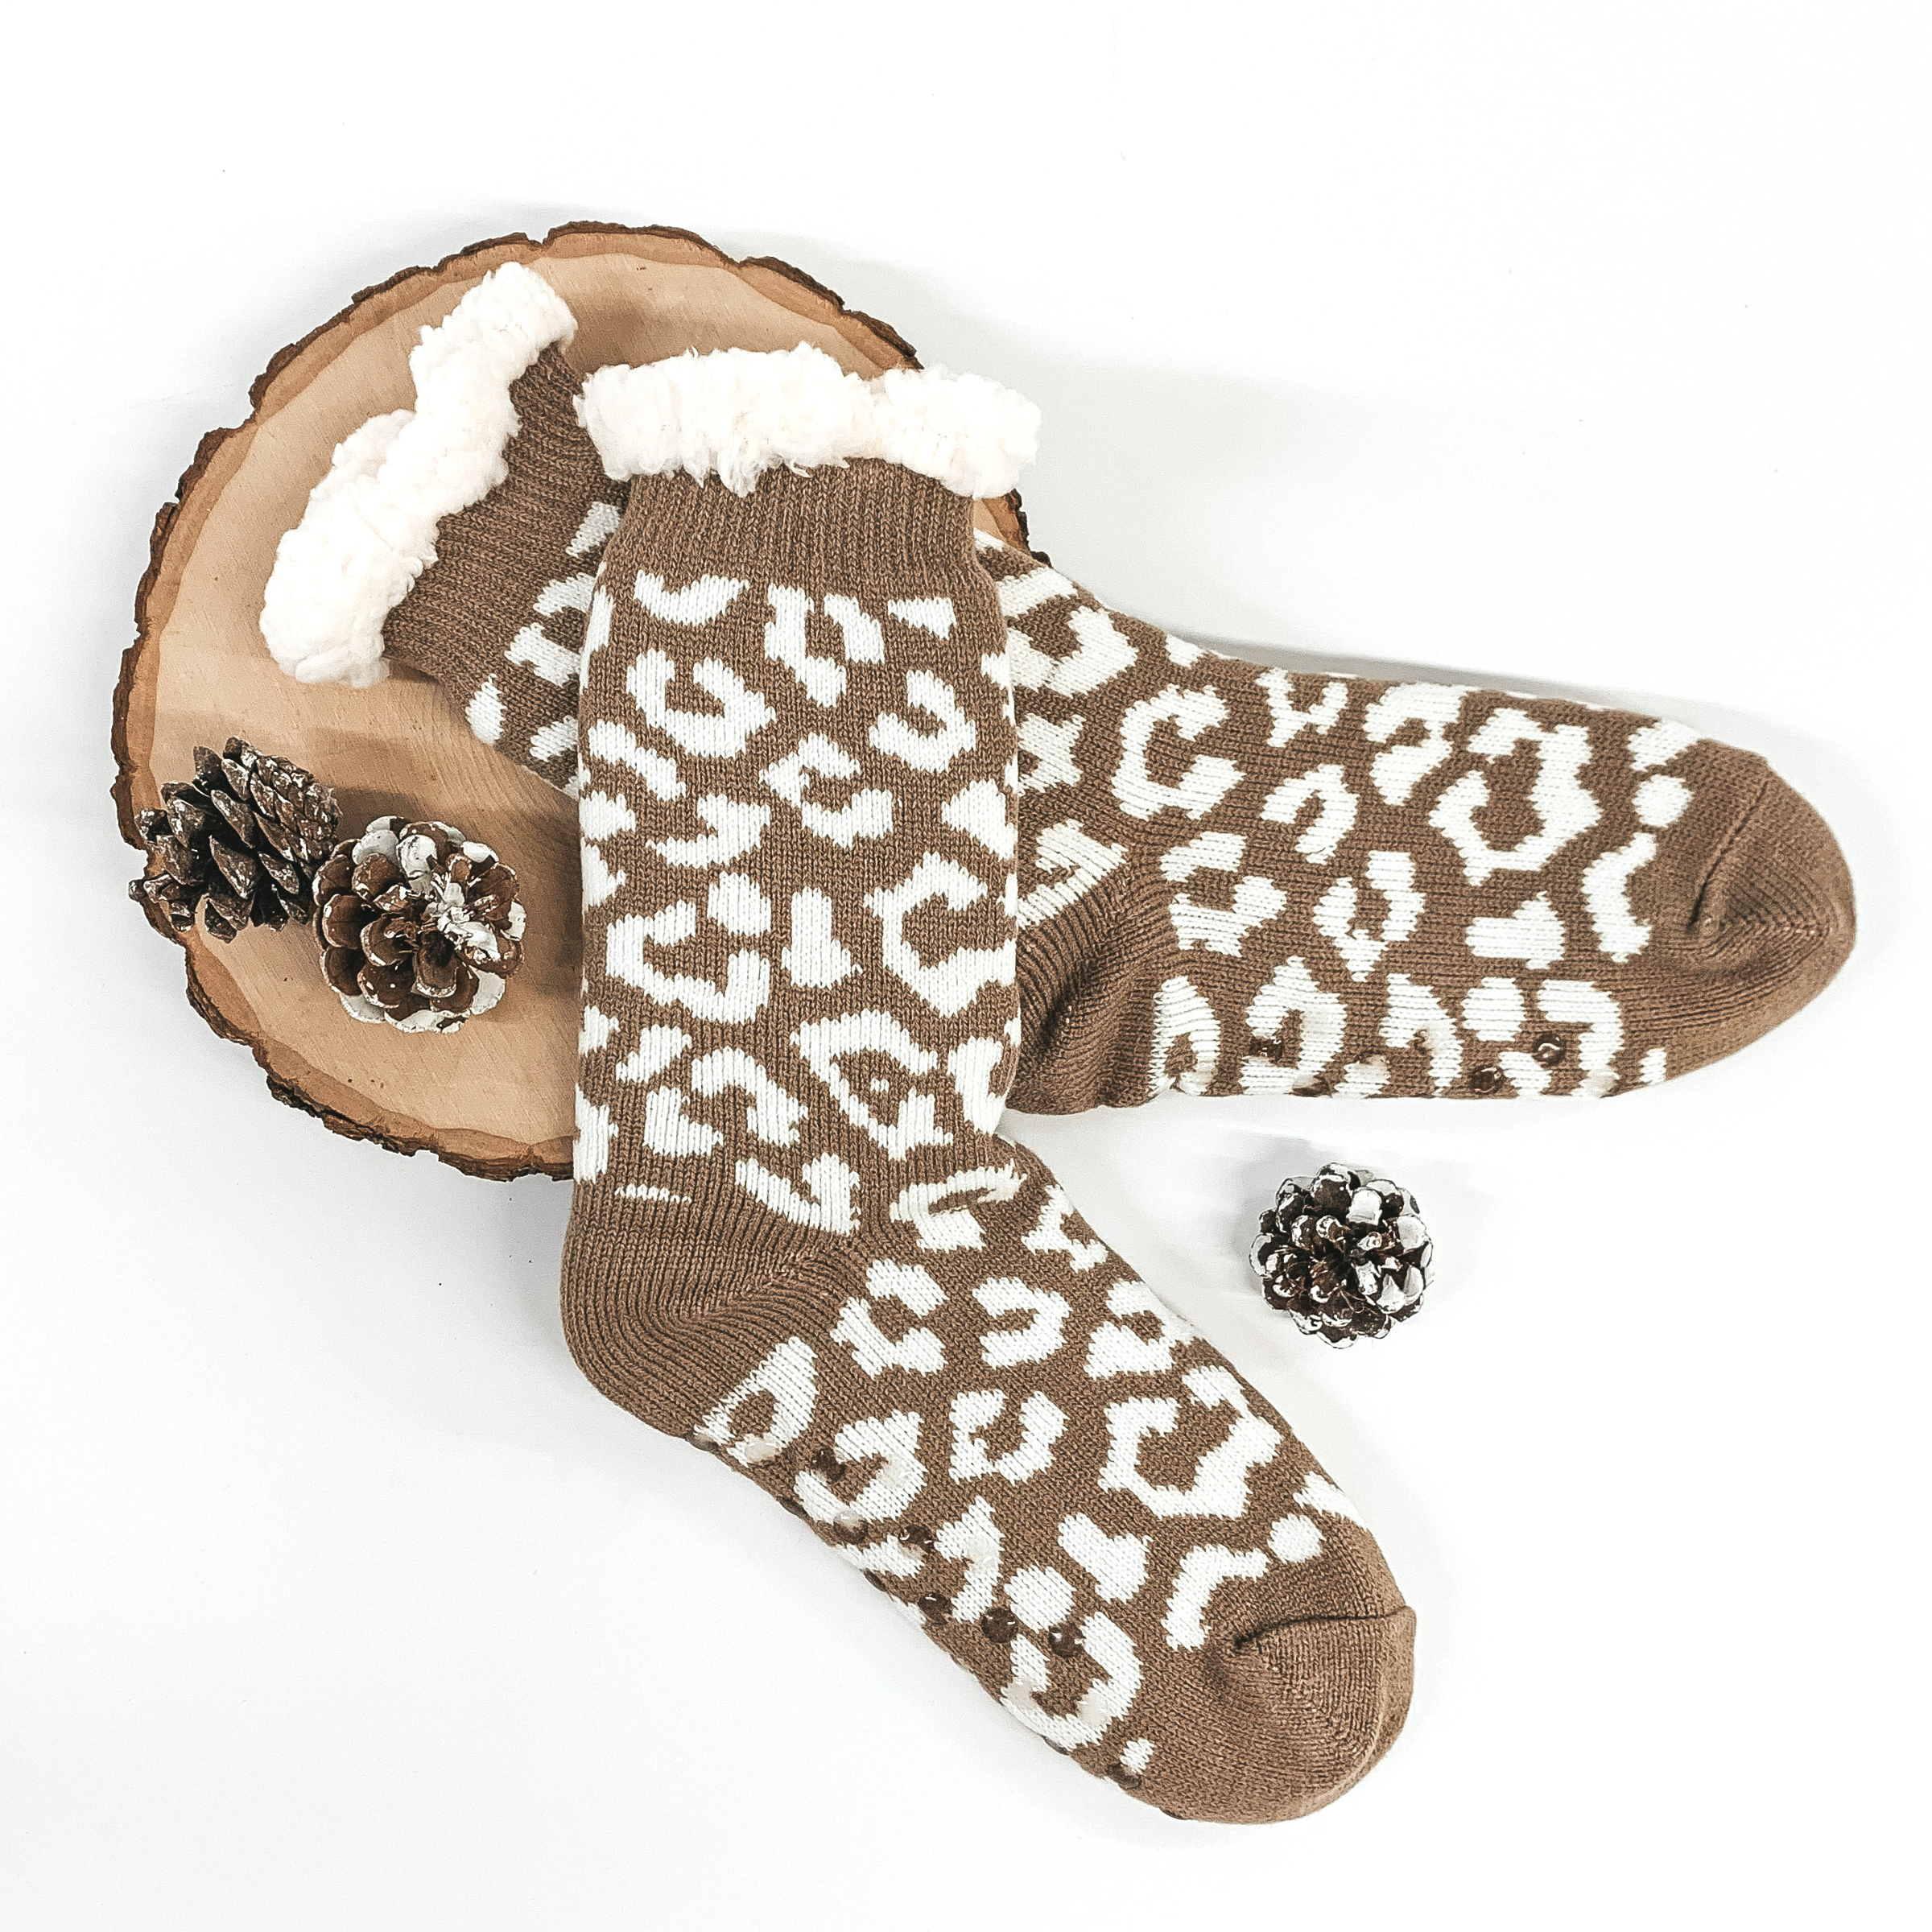 Beige socks with white leopard spots. The socks has white sherpa at the top of the socks. The socks are pictured on a white background laying on a piece of wood with a few pine cones. 